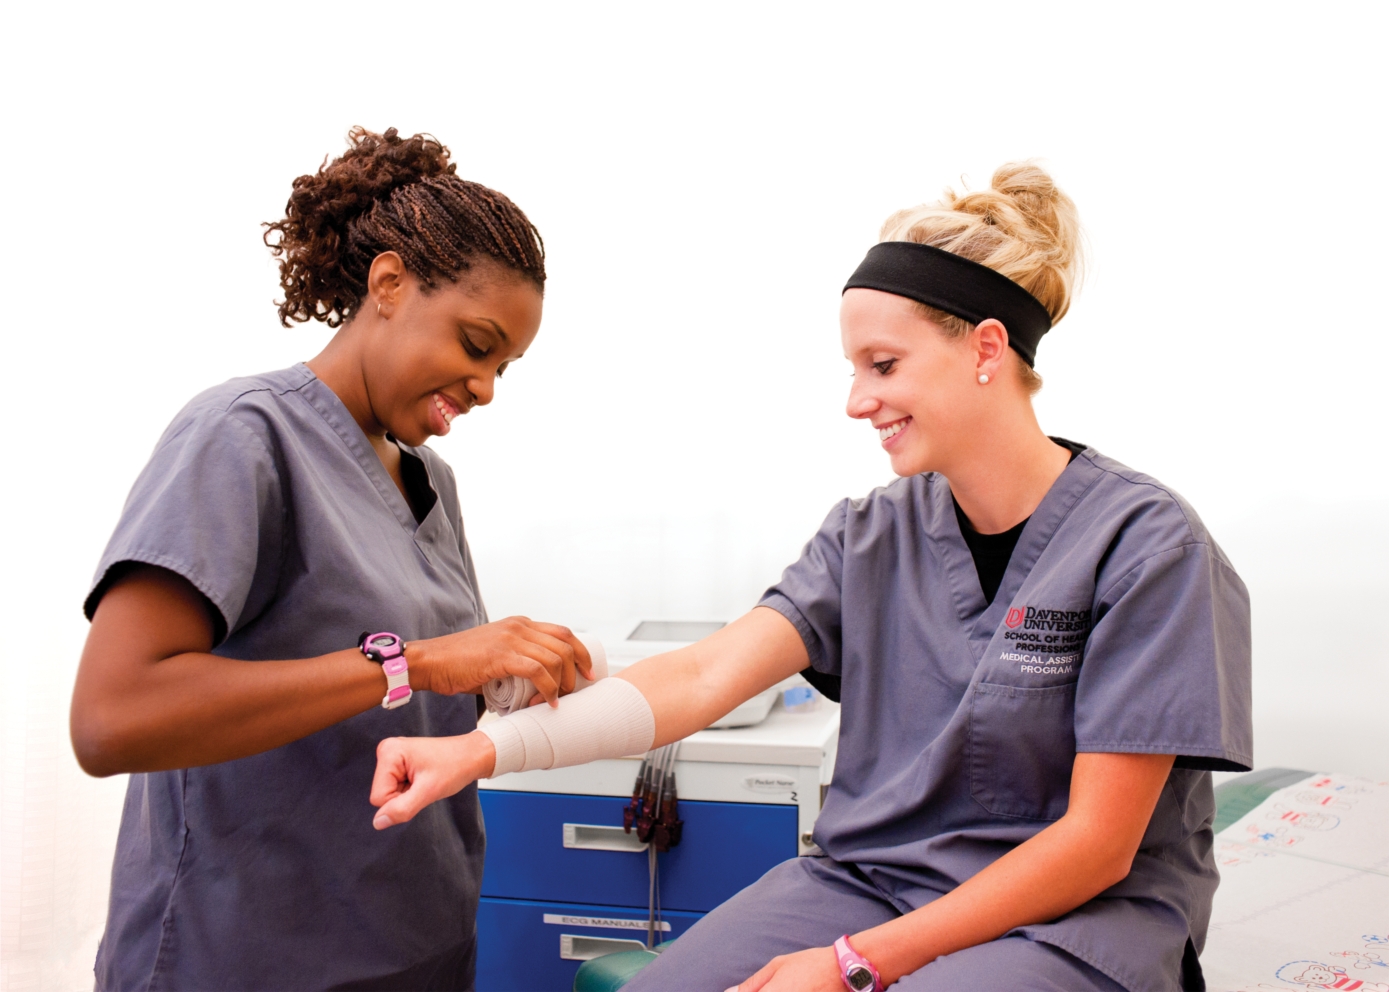 Students in Davenport's College of Health Professions